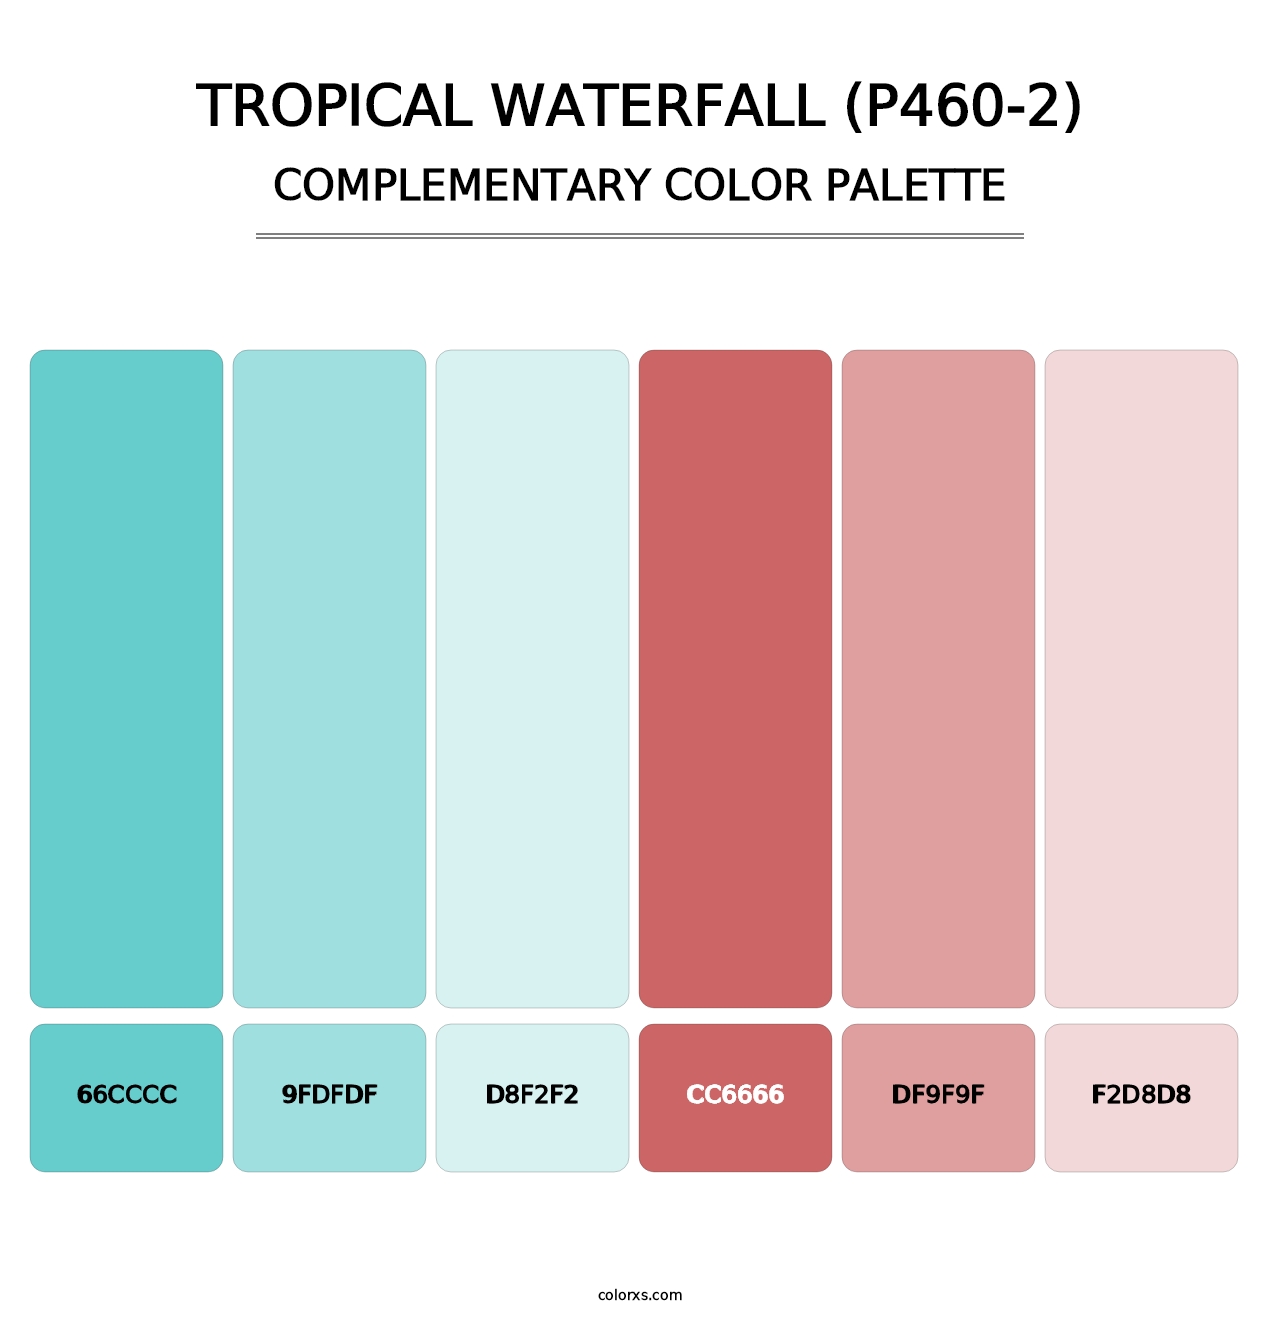 Tropical Waterfall (P460-2) - Complementary Color Palette